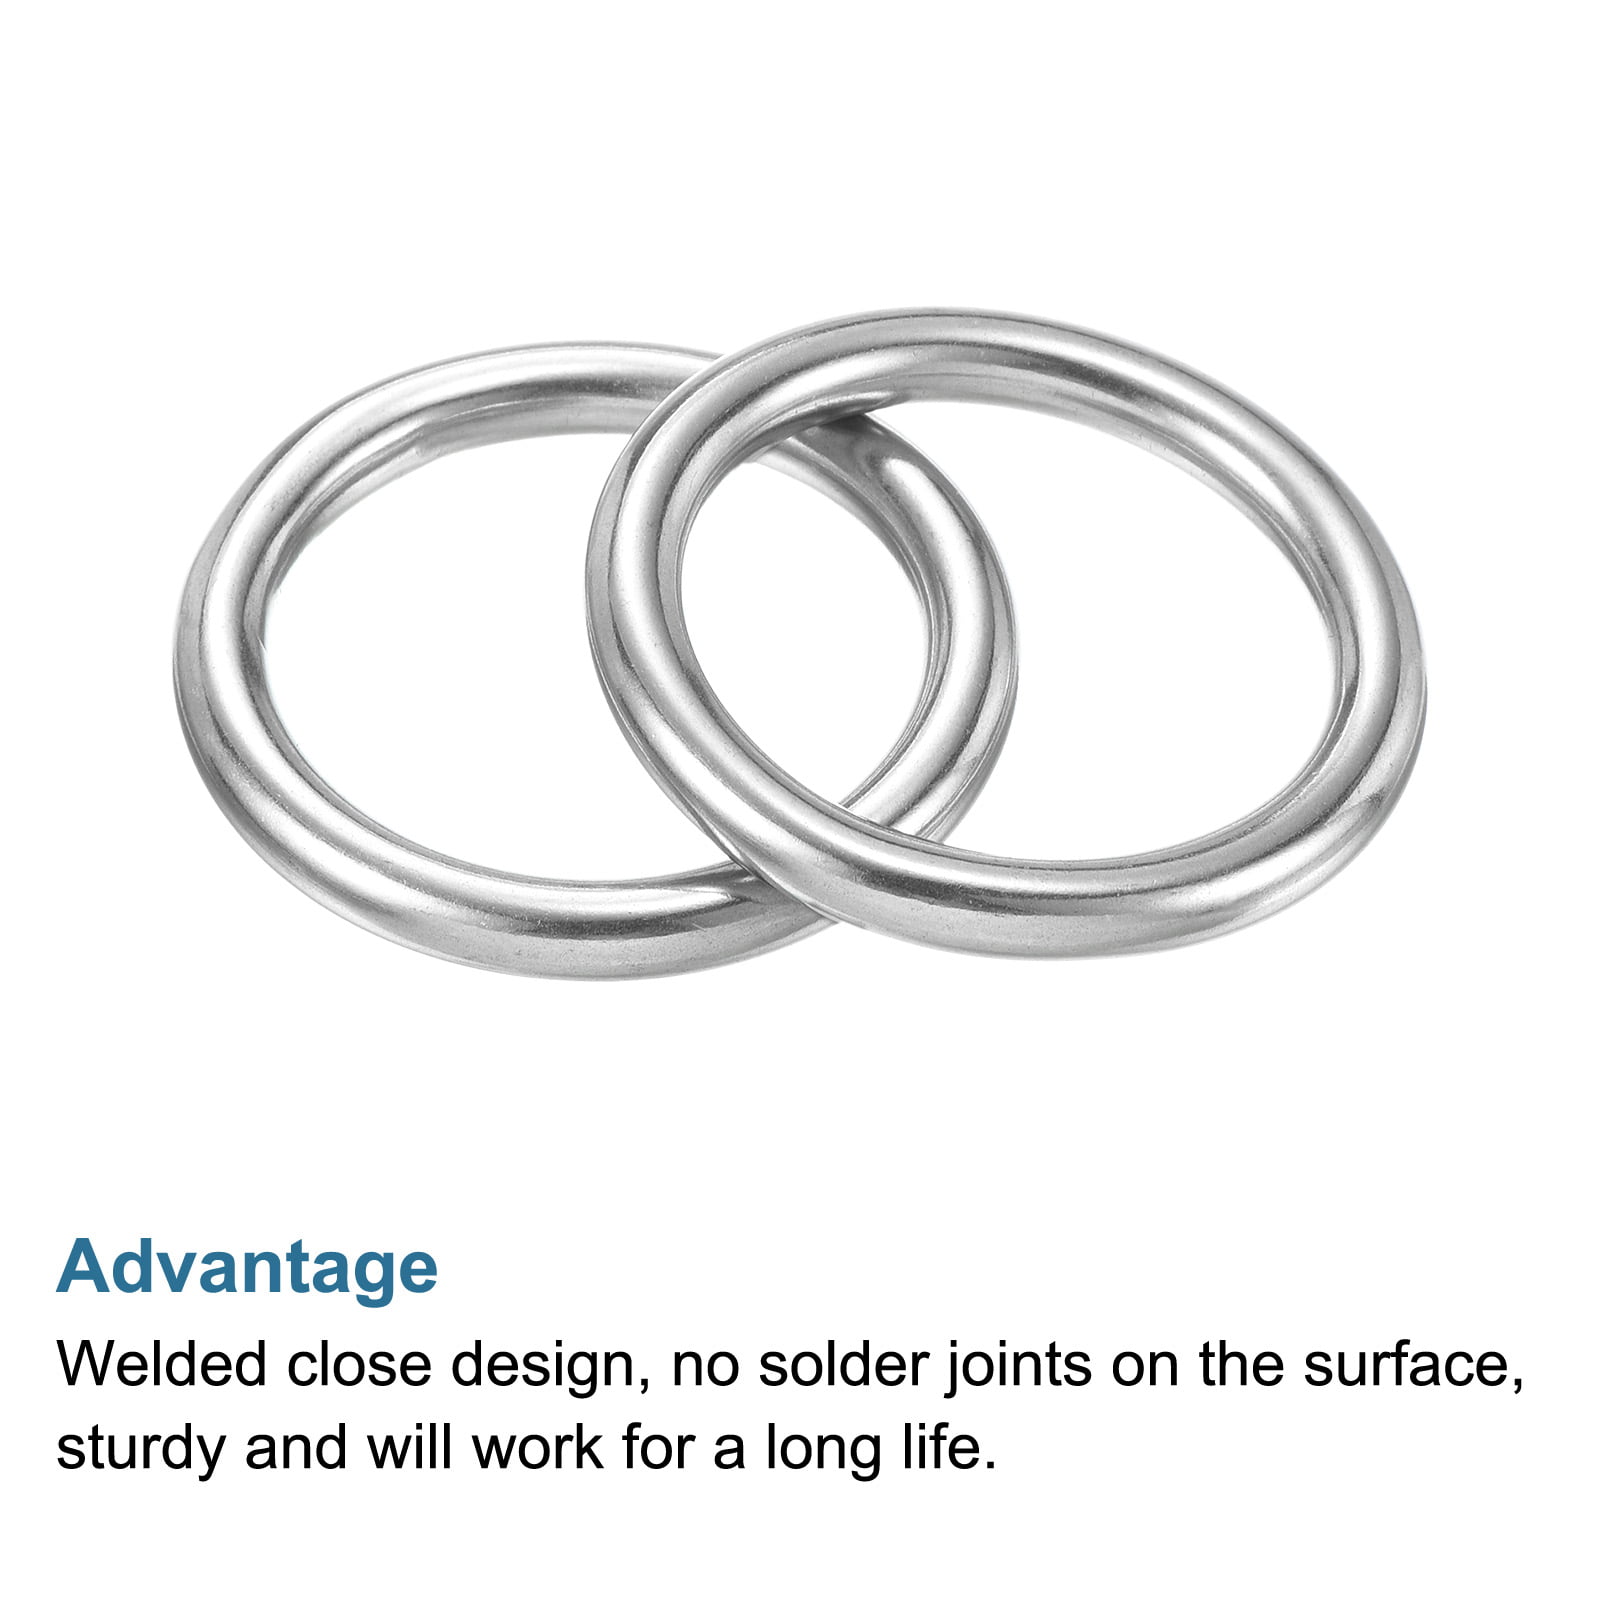 38mm (1.50”), Metal O Ring Non Welded